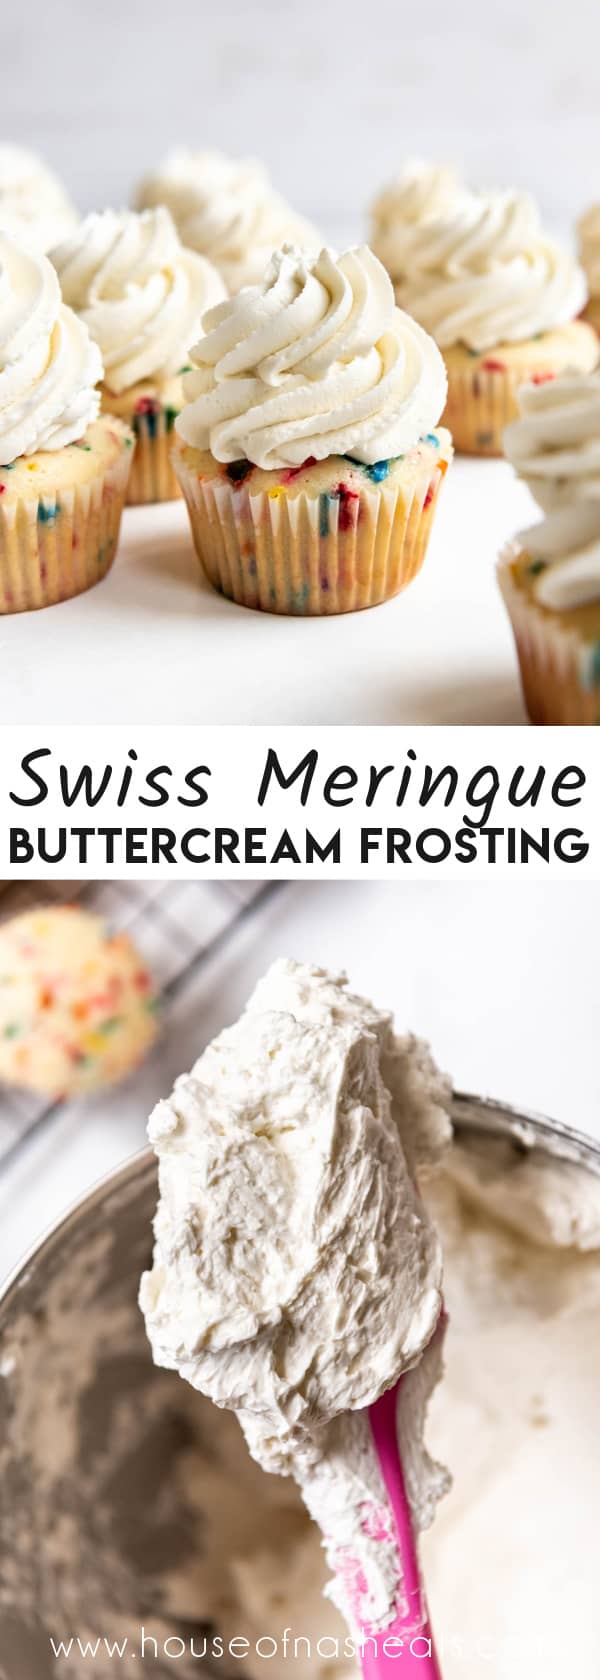 A collage of images of swiss meringue buttercream frosting with text overlay.